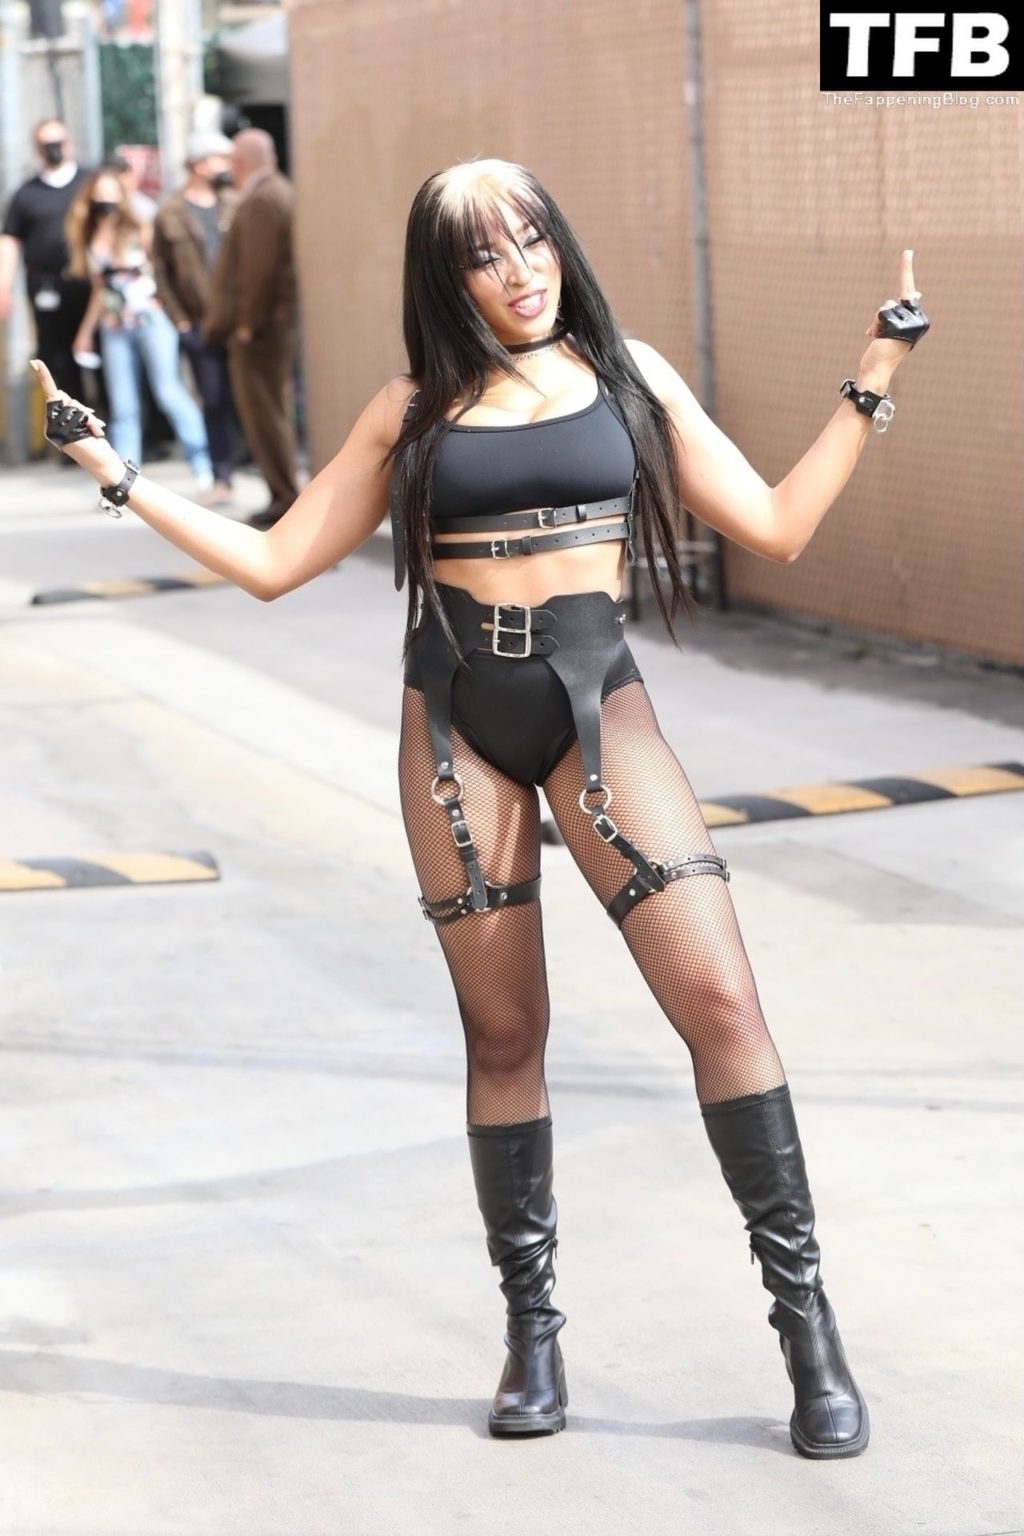 Tinashe Turns Heads at Her Guest Performance on Jimmy Kimmel (66 Photos)